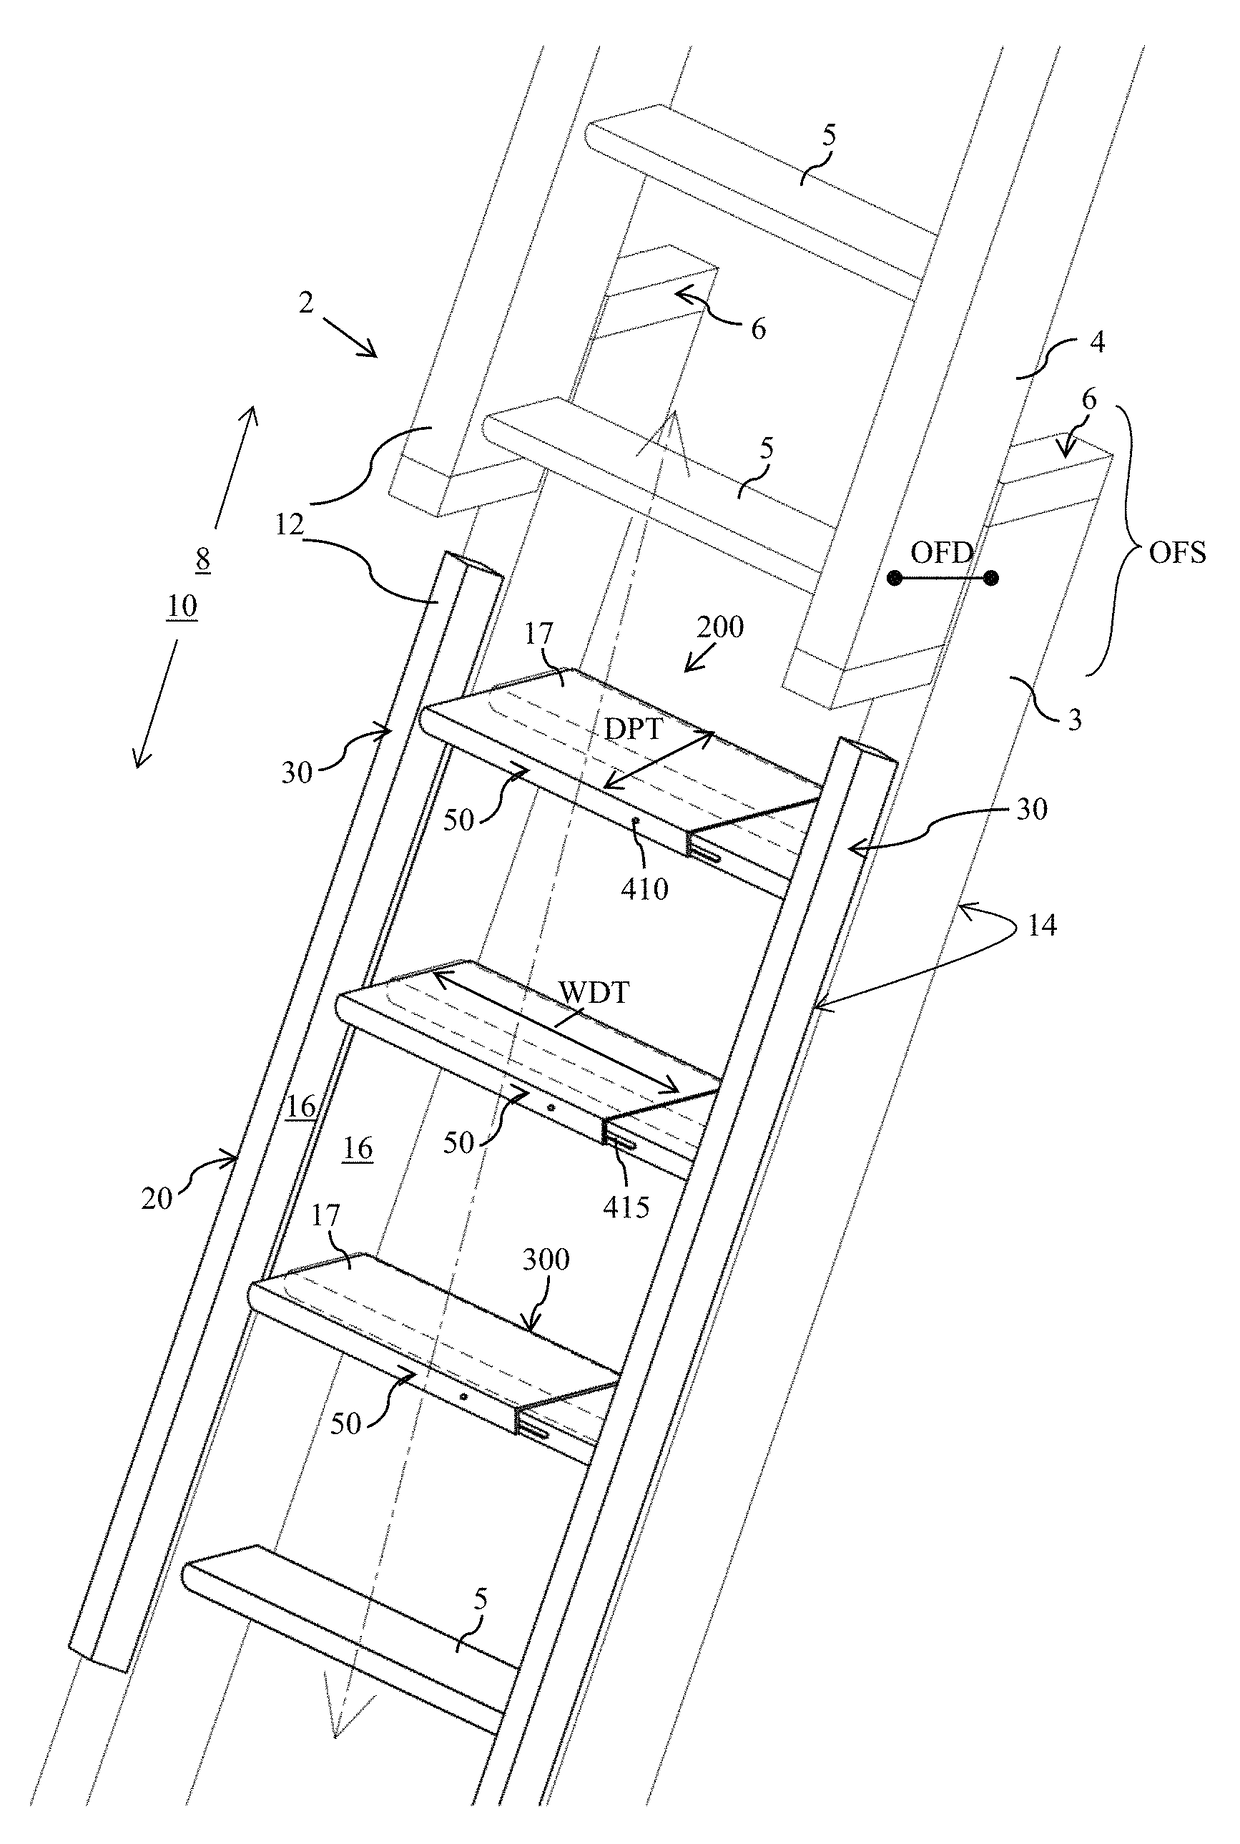 Step adaptor for transitioning between sections of an extension ladder